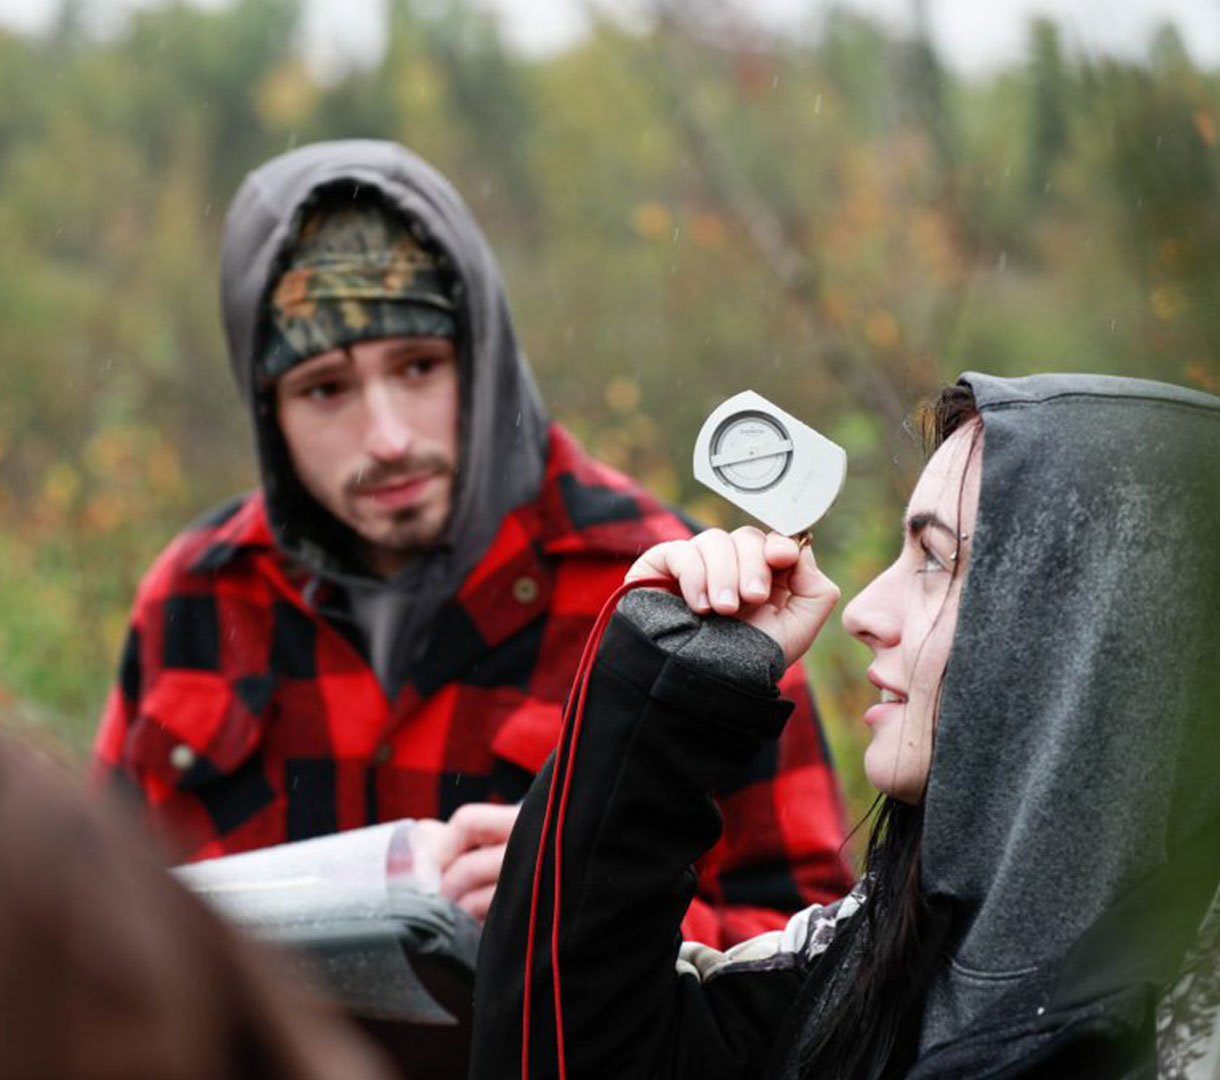 Student using a compass outdoors